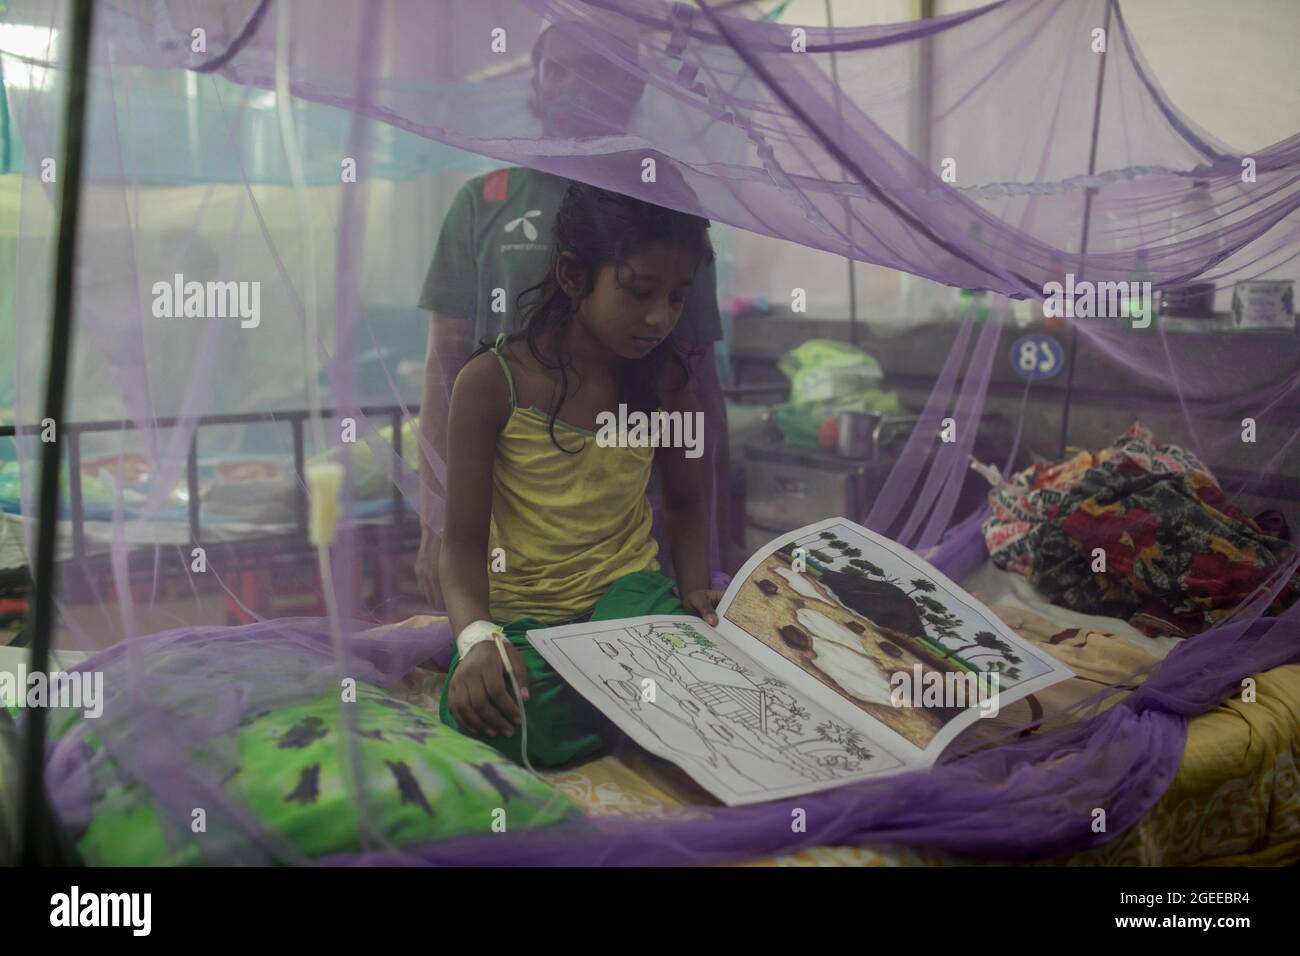 A child seen drawing cartoons inside a mosquito net during daytime at Children's Hospital.With Bangladesh grappling with the Covid-19 pandemic, dengue poses a great threat to the country's children. At present, severe dengue affects most Asian countries and has become a leading cause of hospitalizations and deaths among children as well as adults in these regions, according to WHO. In such dire circumstances, some Dhaka residents are lighting mosquito-repelling incenses even during the day to steer clear of the mosquito-borne viral disease. (Photo by Sazzad Hossain/SOPA Images/Sipa USA) Stock Photo